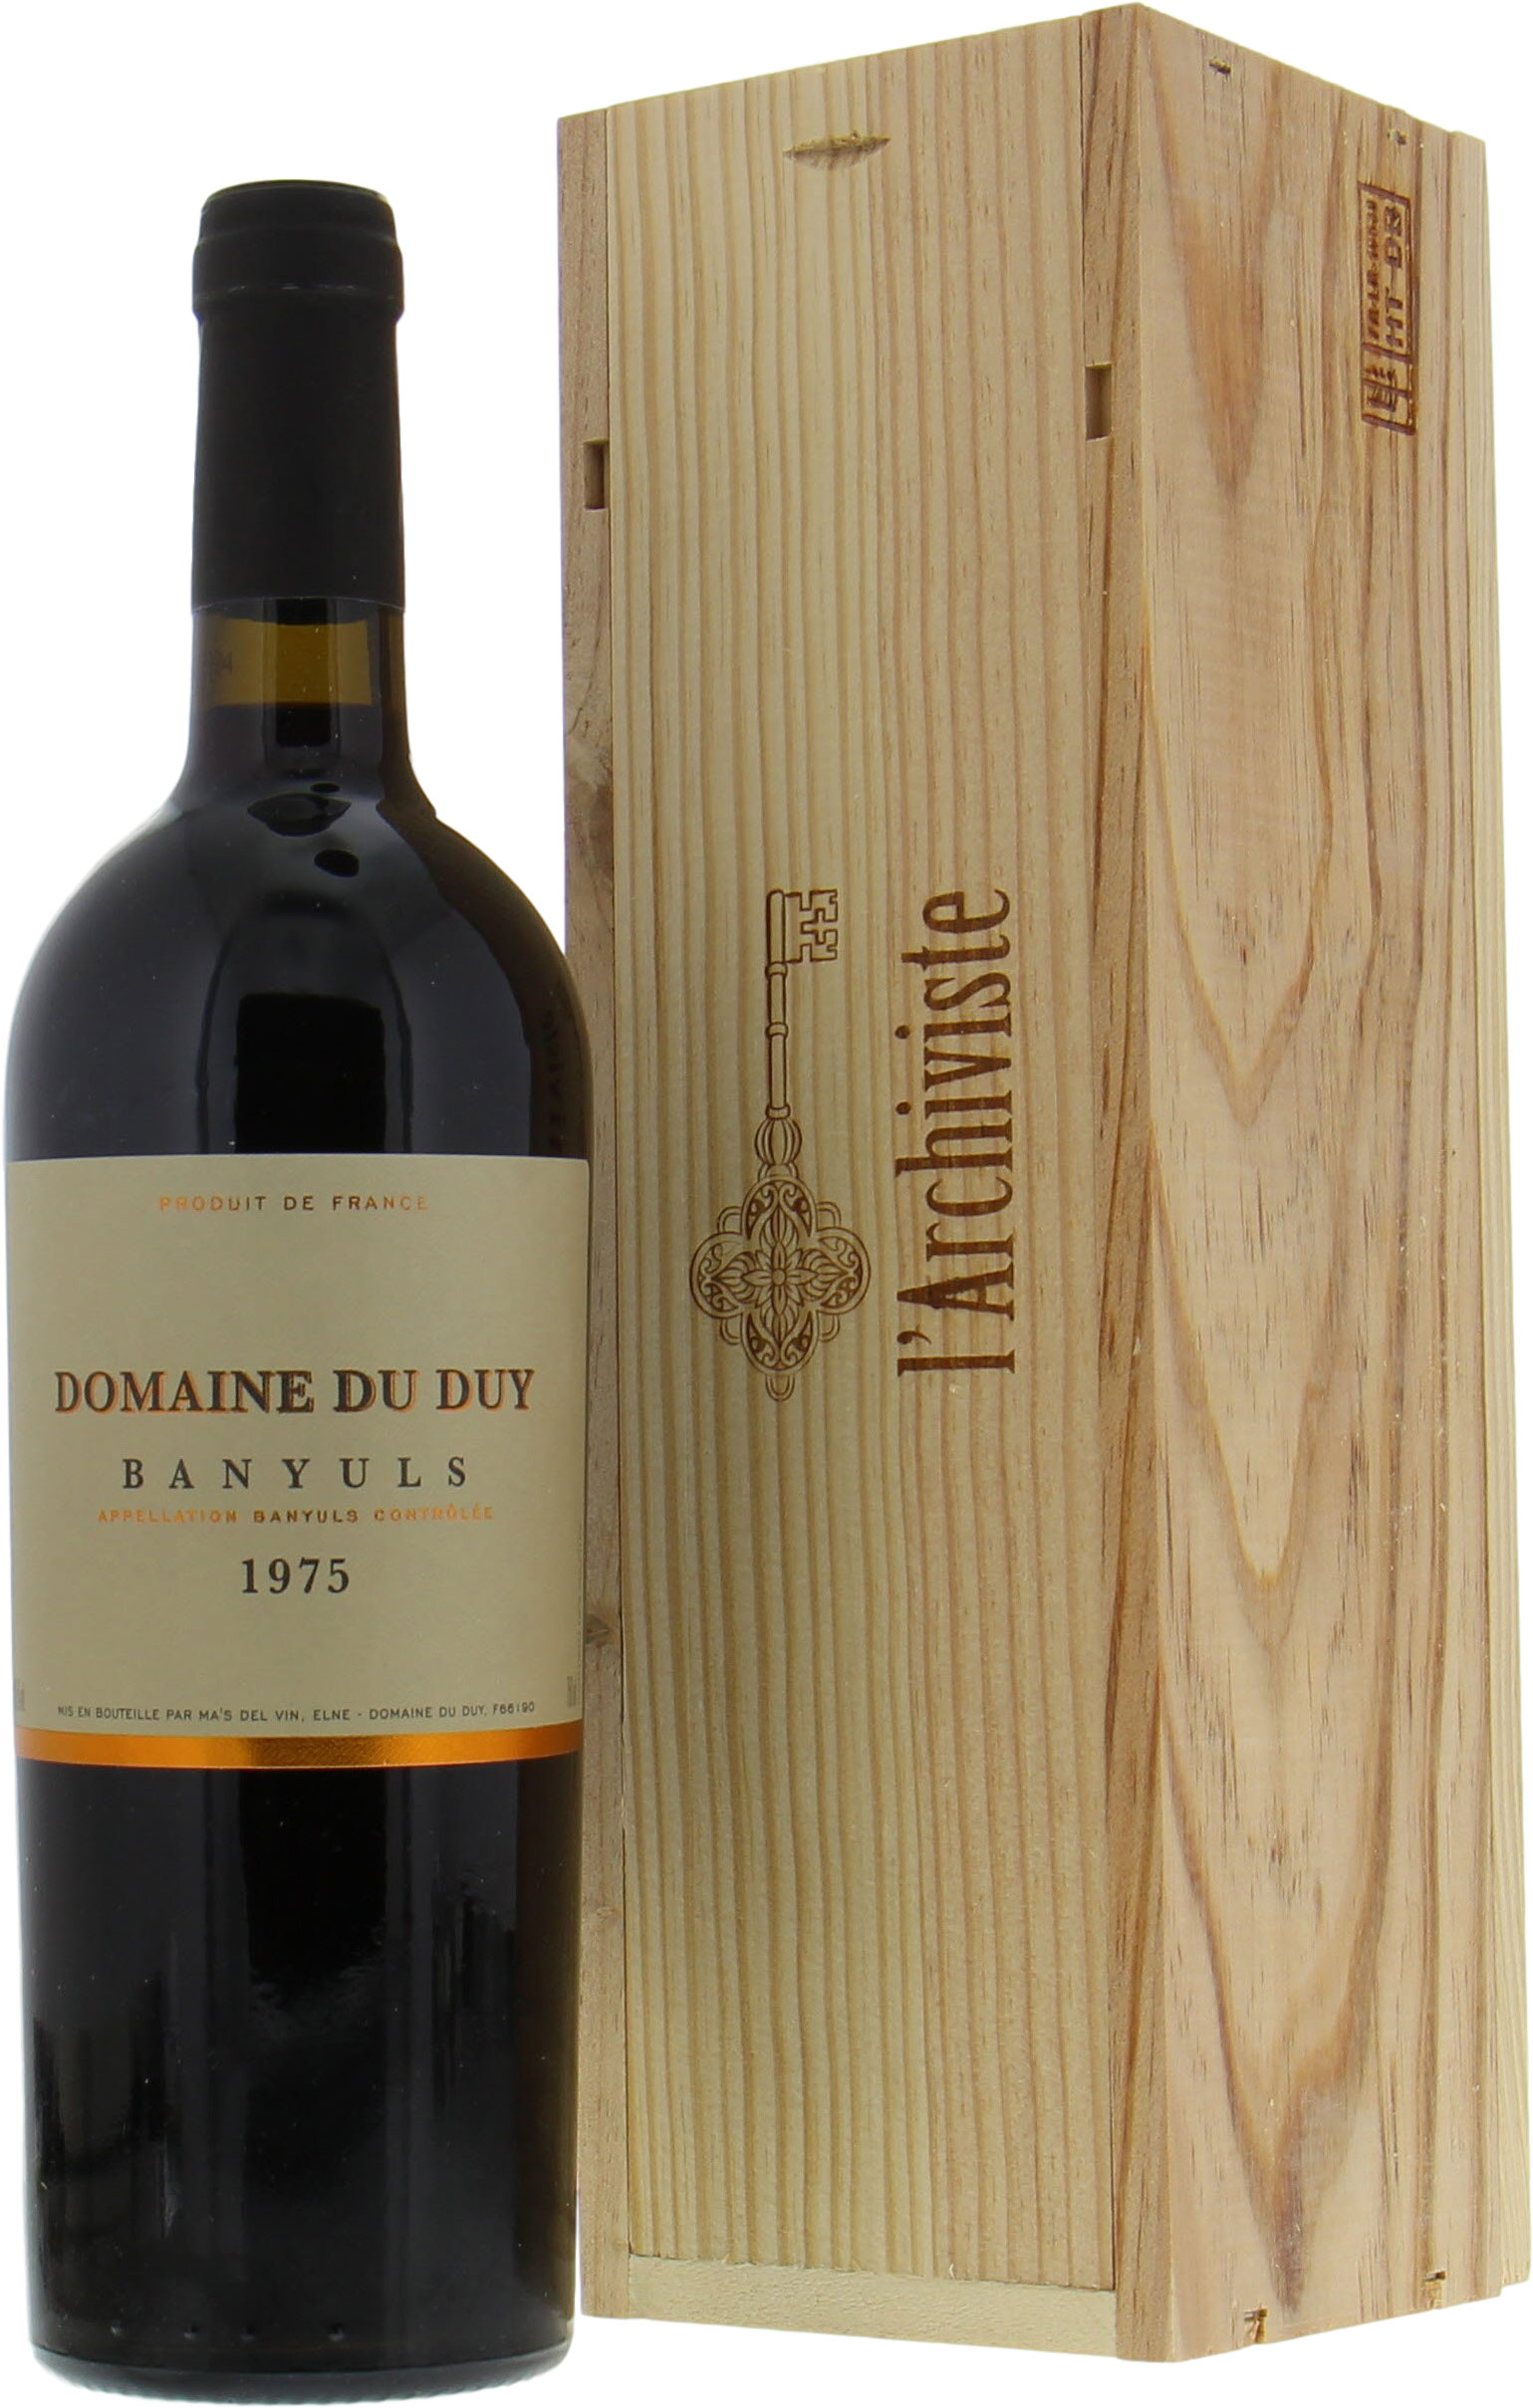 Domaine du Duy - Banyuls 1975 Perfect